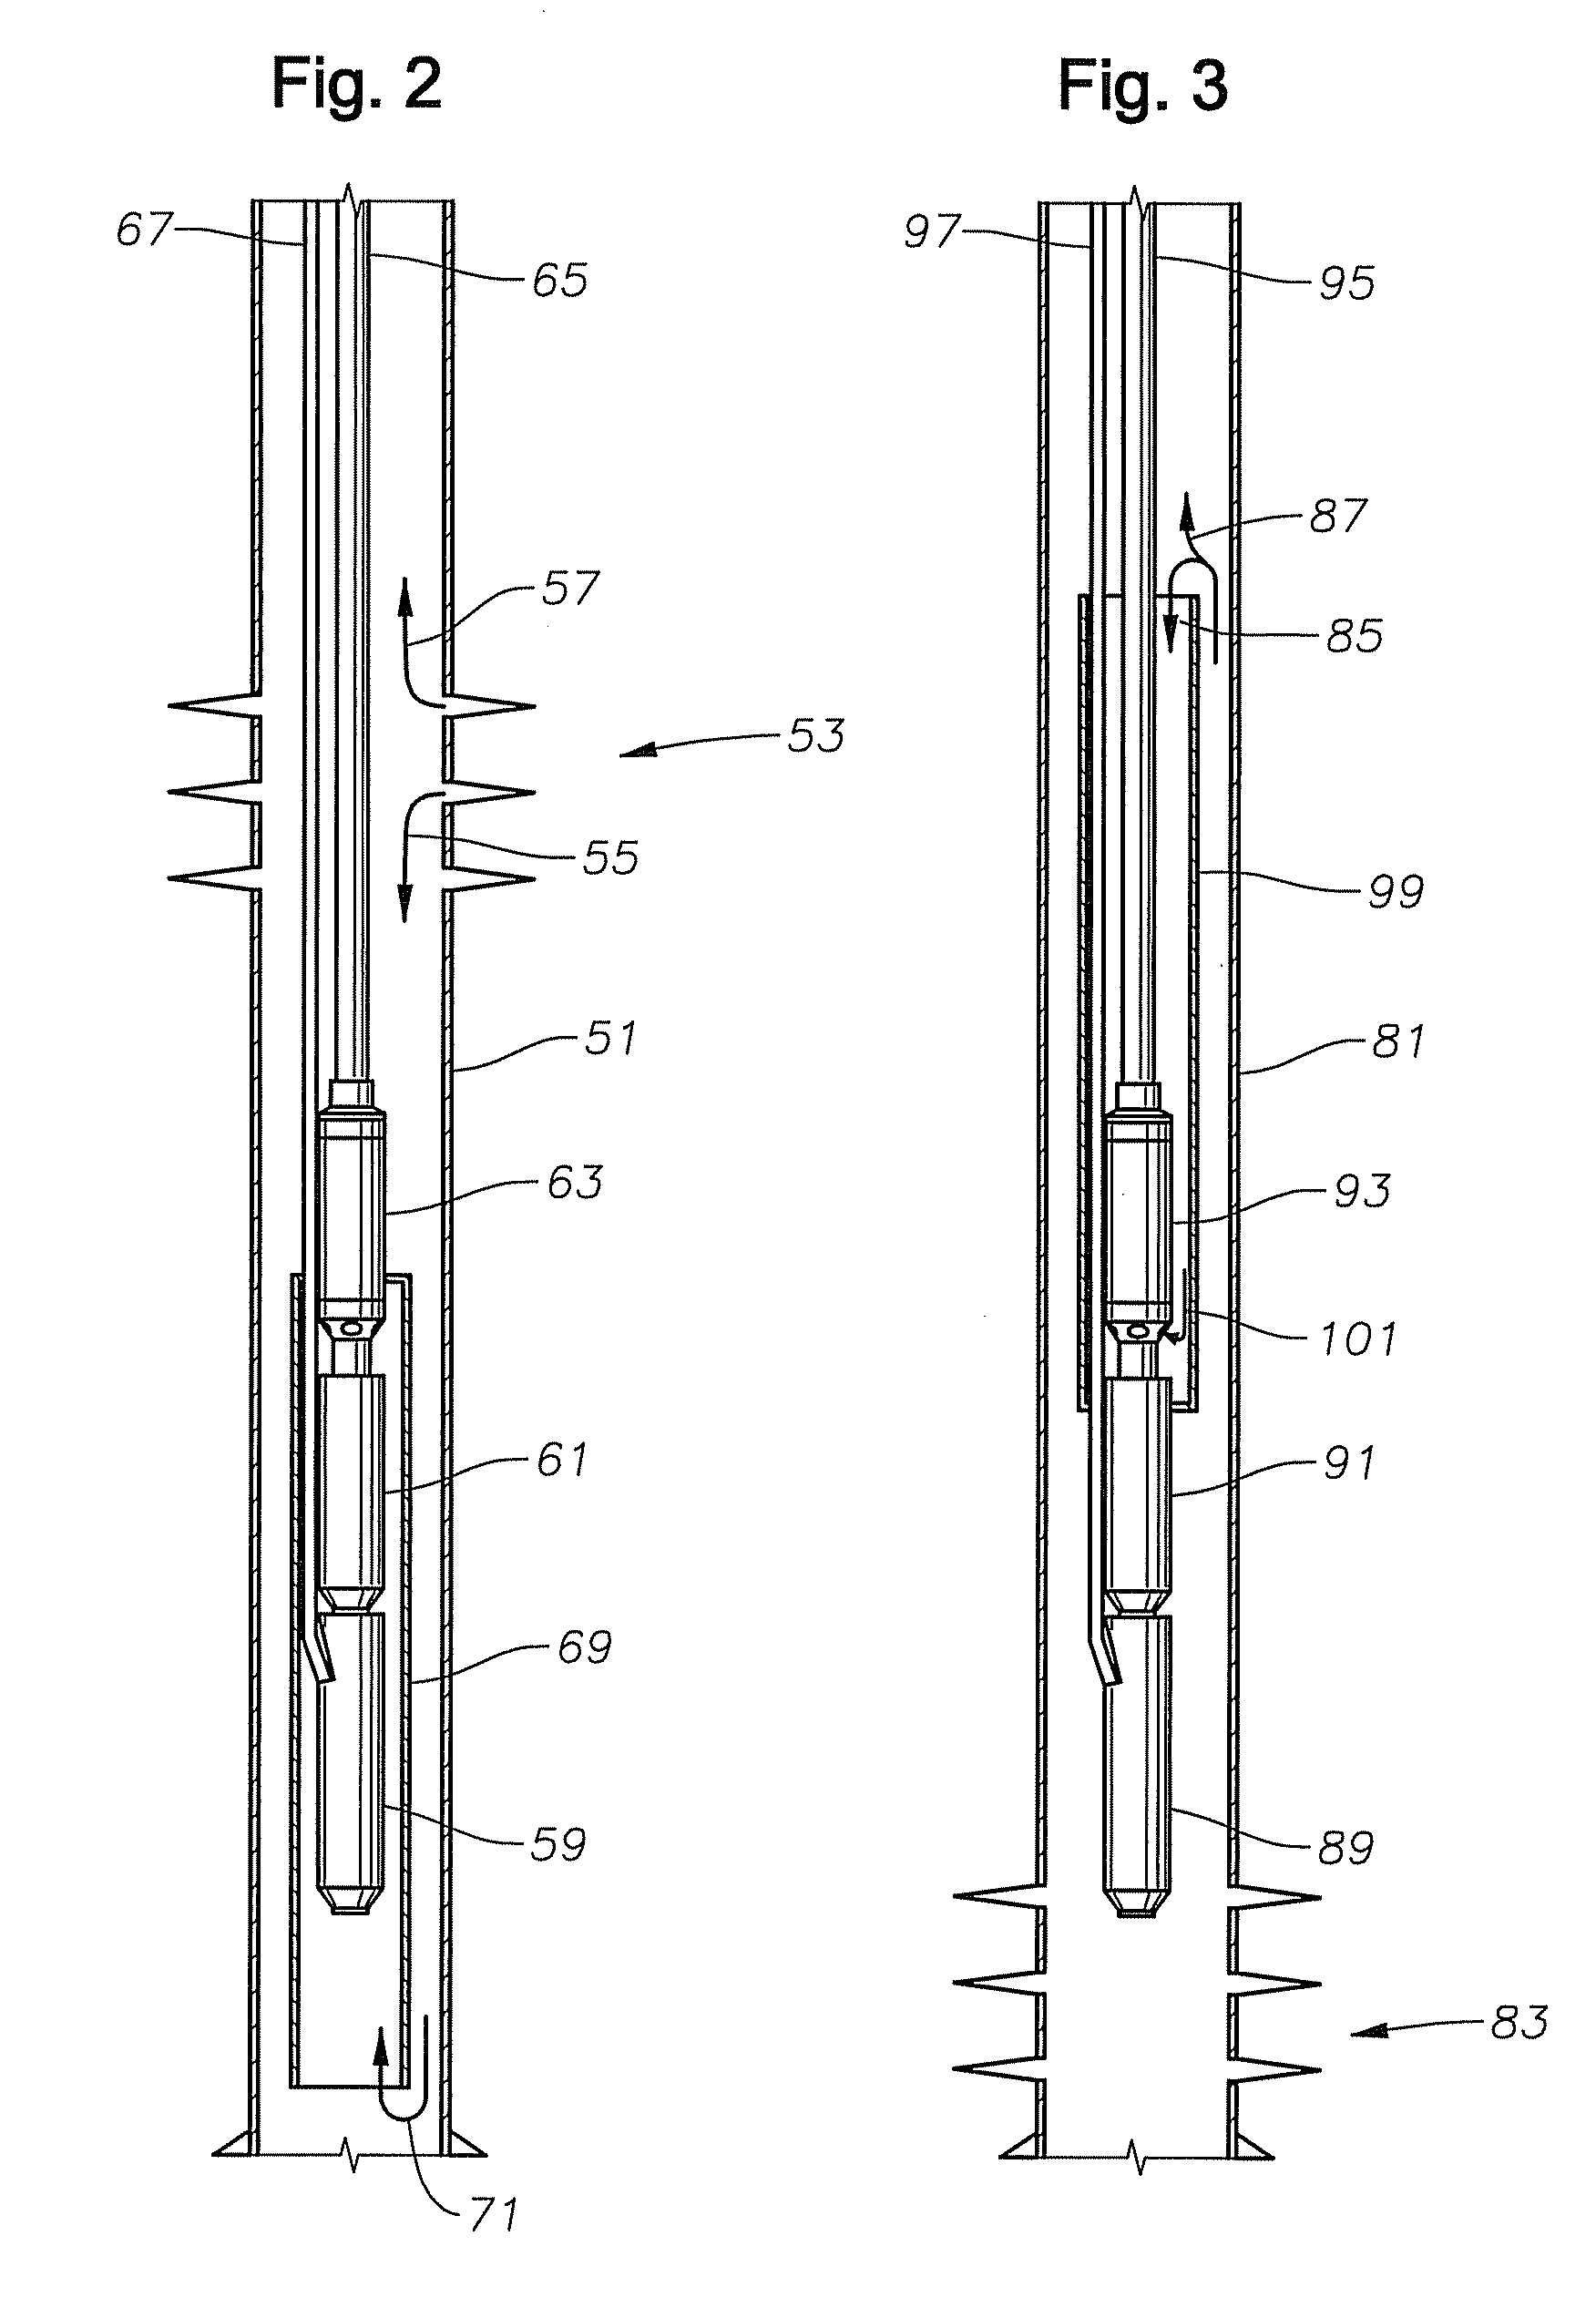 System, method and apparatus for controlling the flow rate of an electrical submersible pump based on fluid density